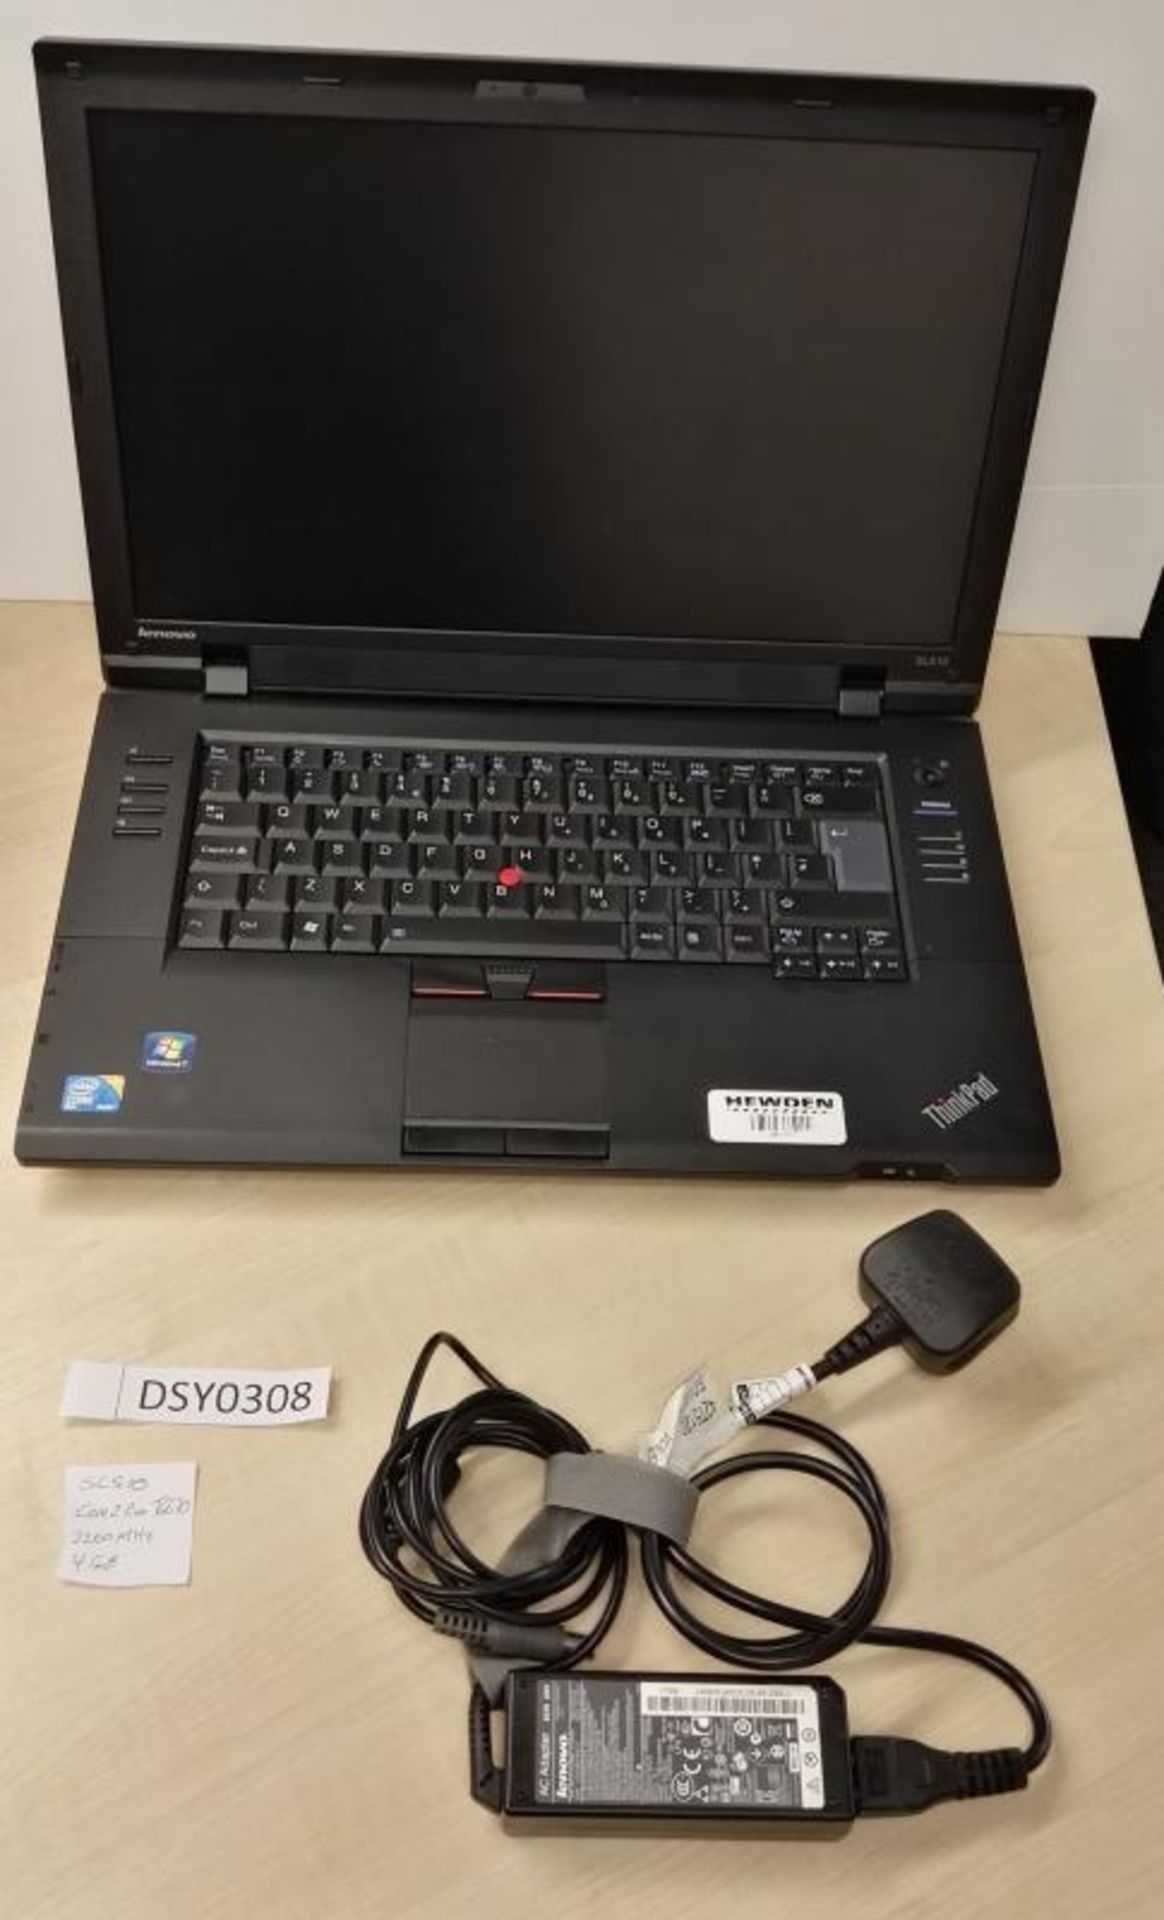 1 x Lenovo Thinkpad SL510 Laptop Computer - Features a 15.6 Inch Screen, Intel Core 2 Duo T6670 2.2g